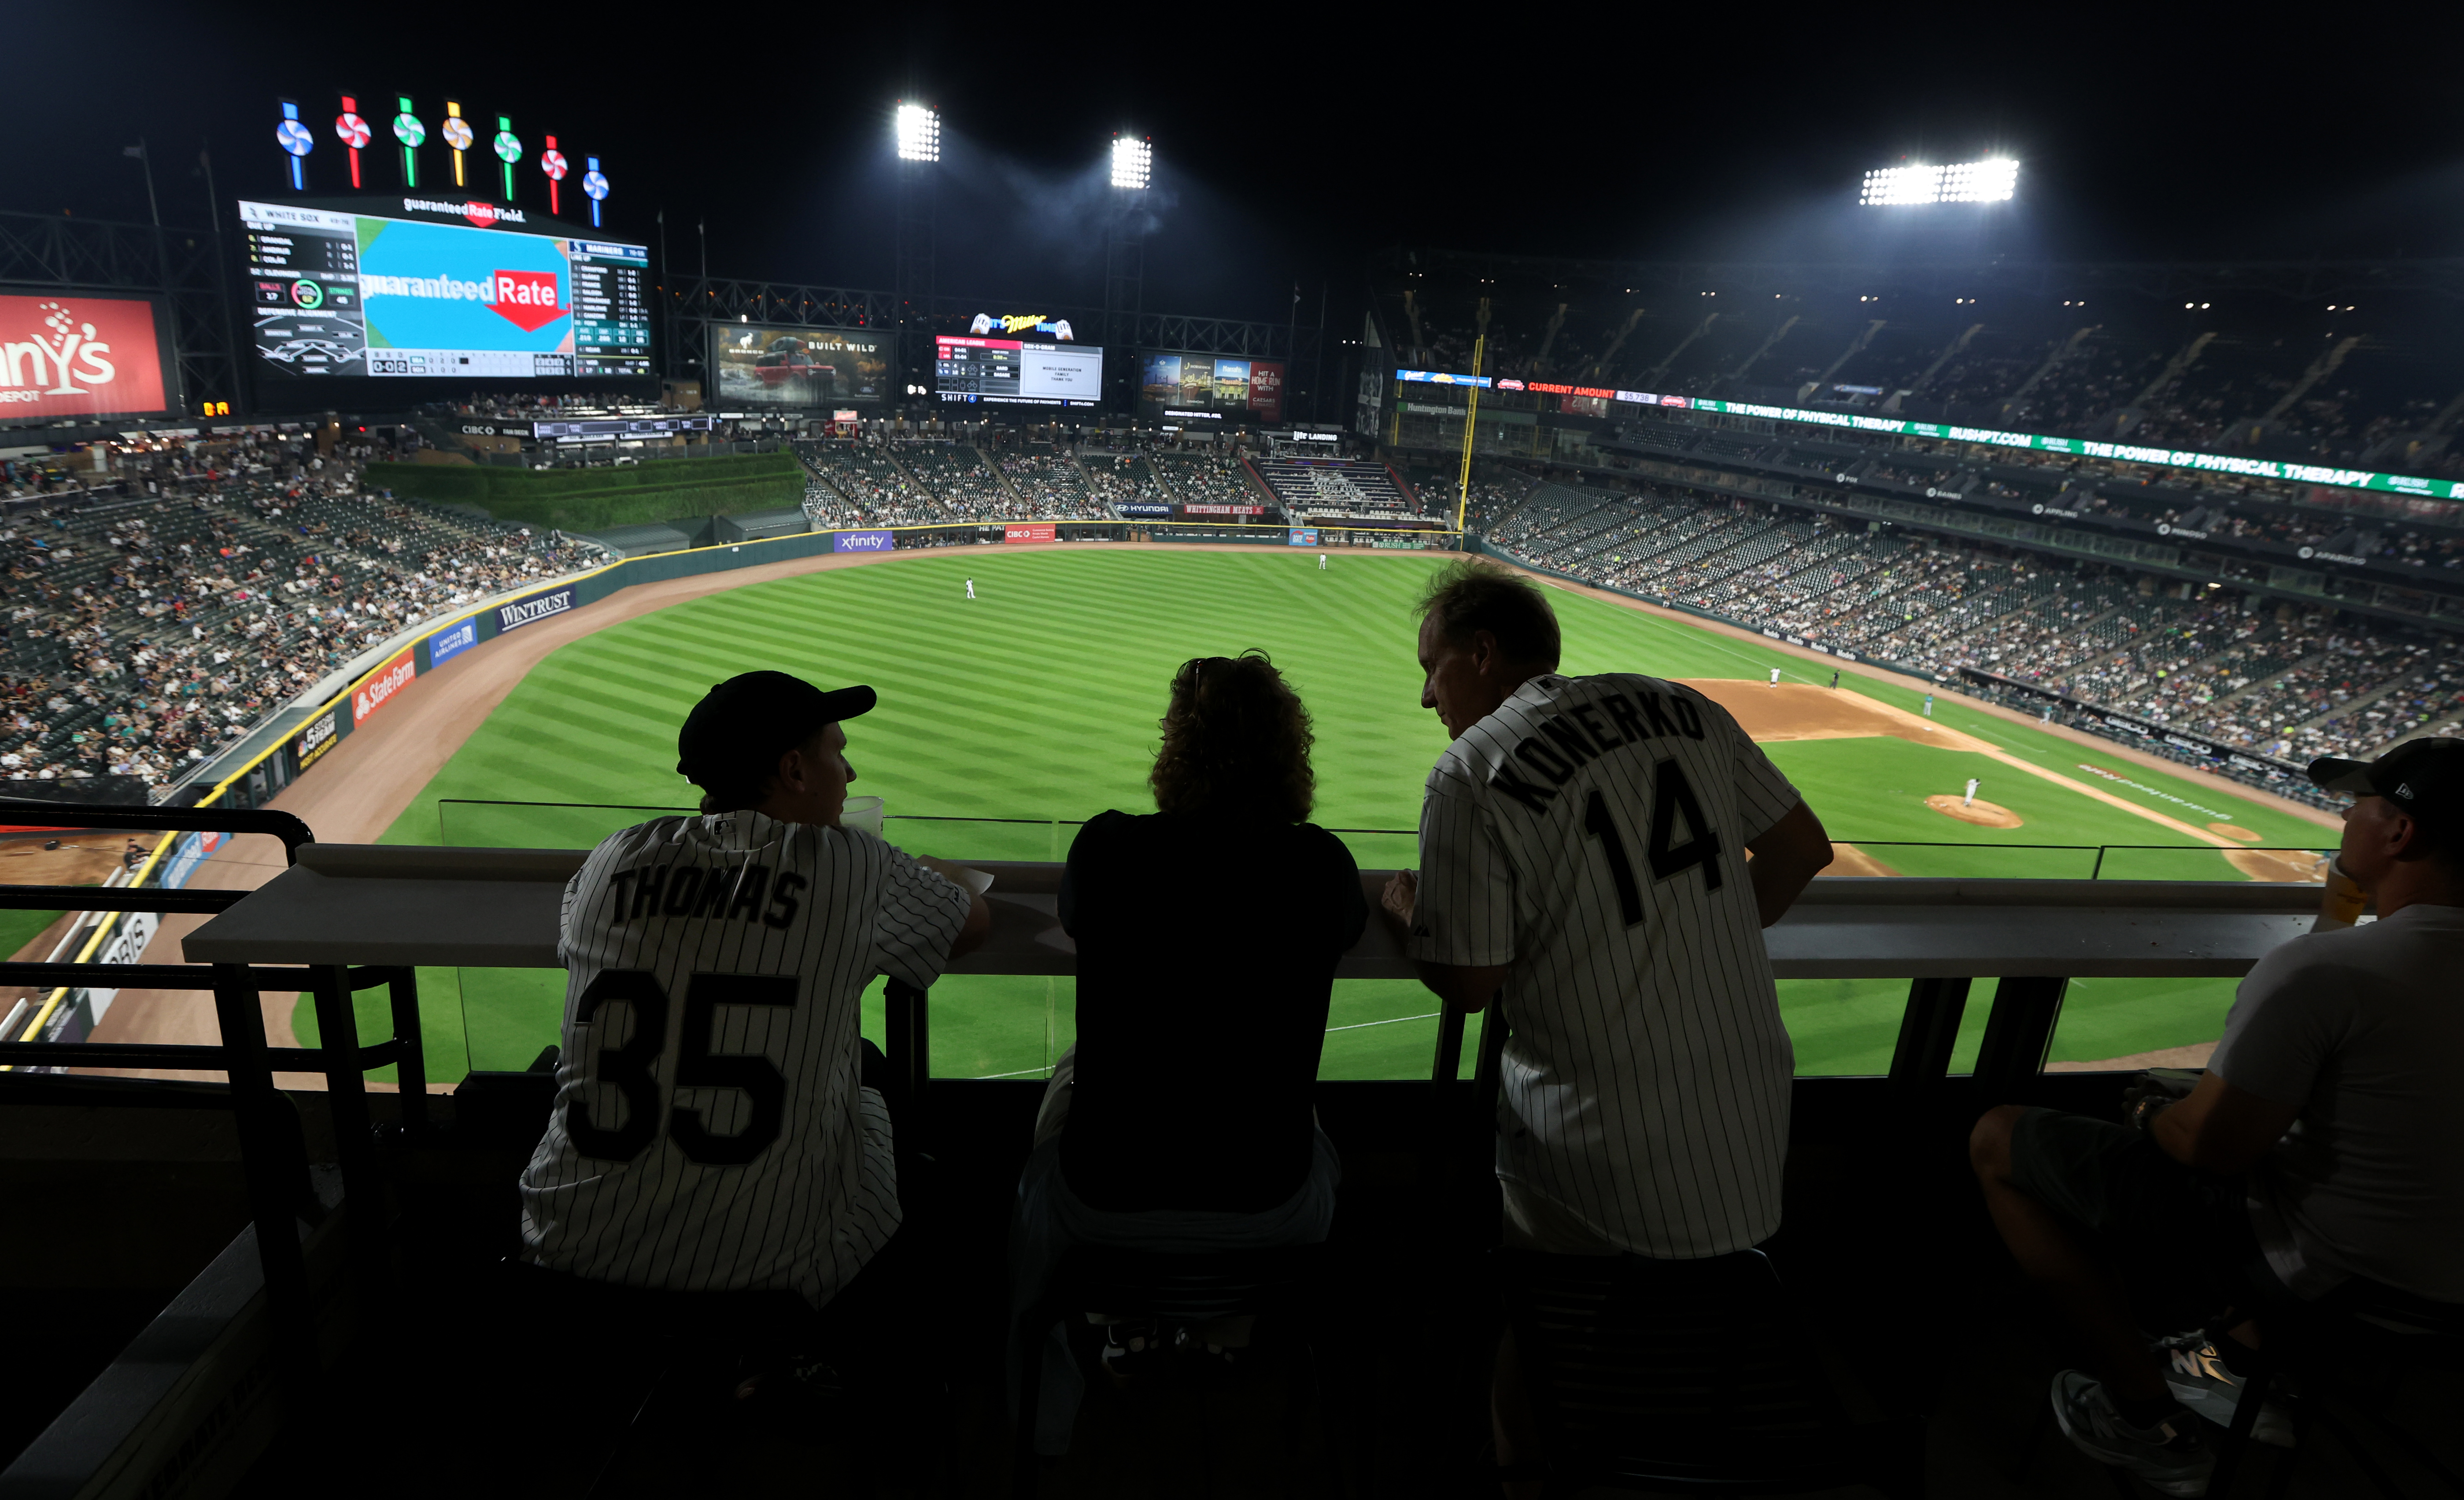 Today in Chicago White Sox History: January 22 - South Side Sox